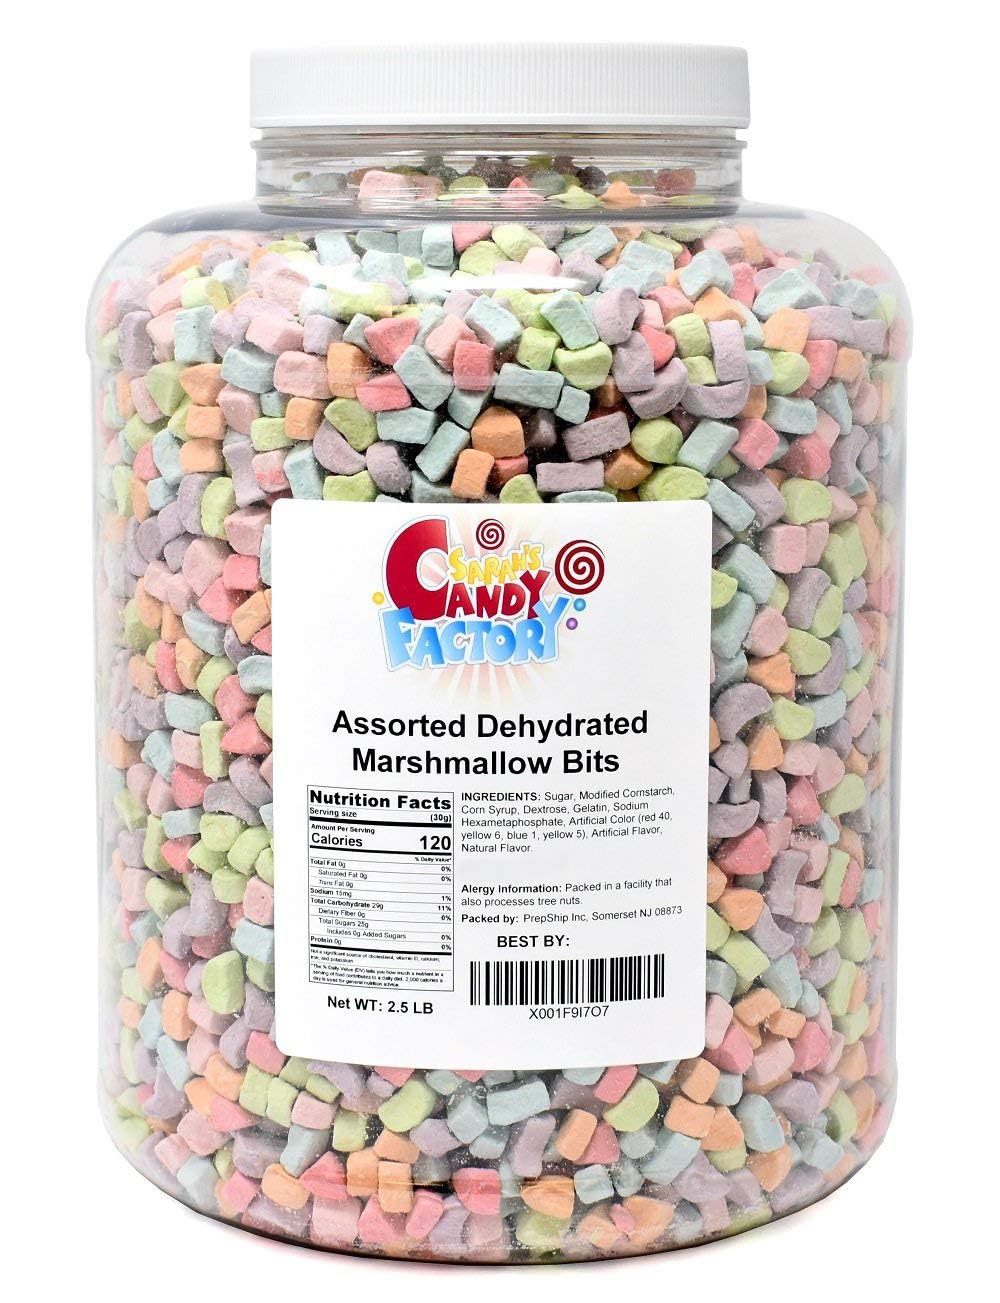  Assorted Dehydrated Marshmallow Bits in Jar, 2.5 Pounds